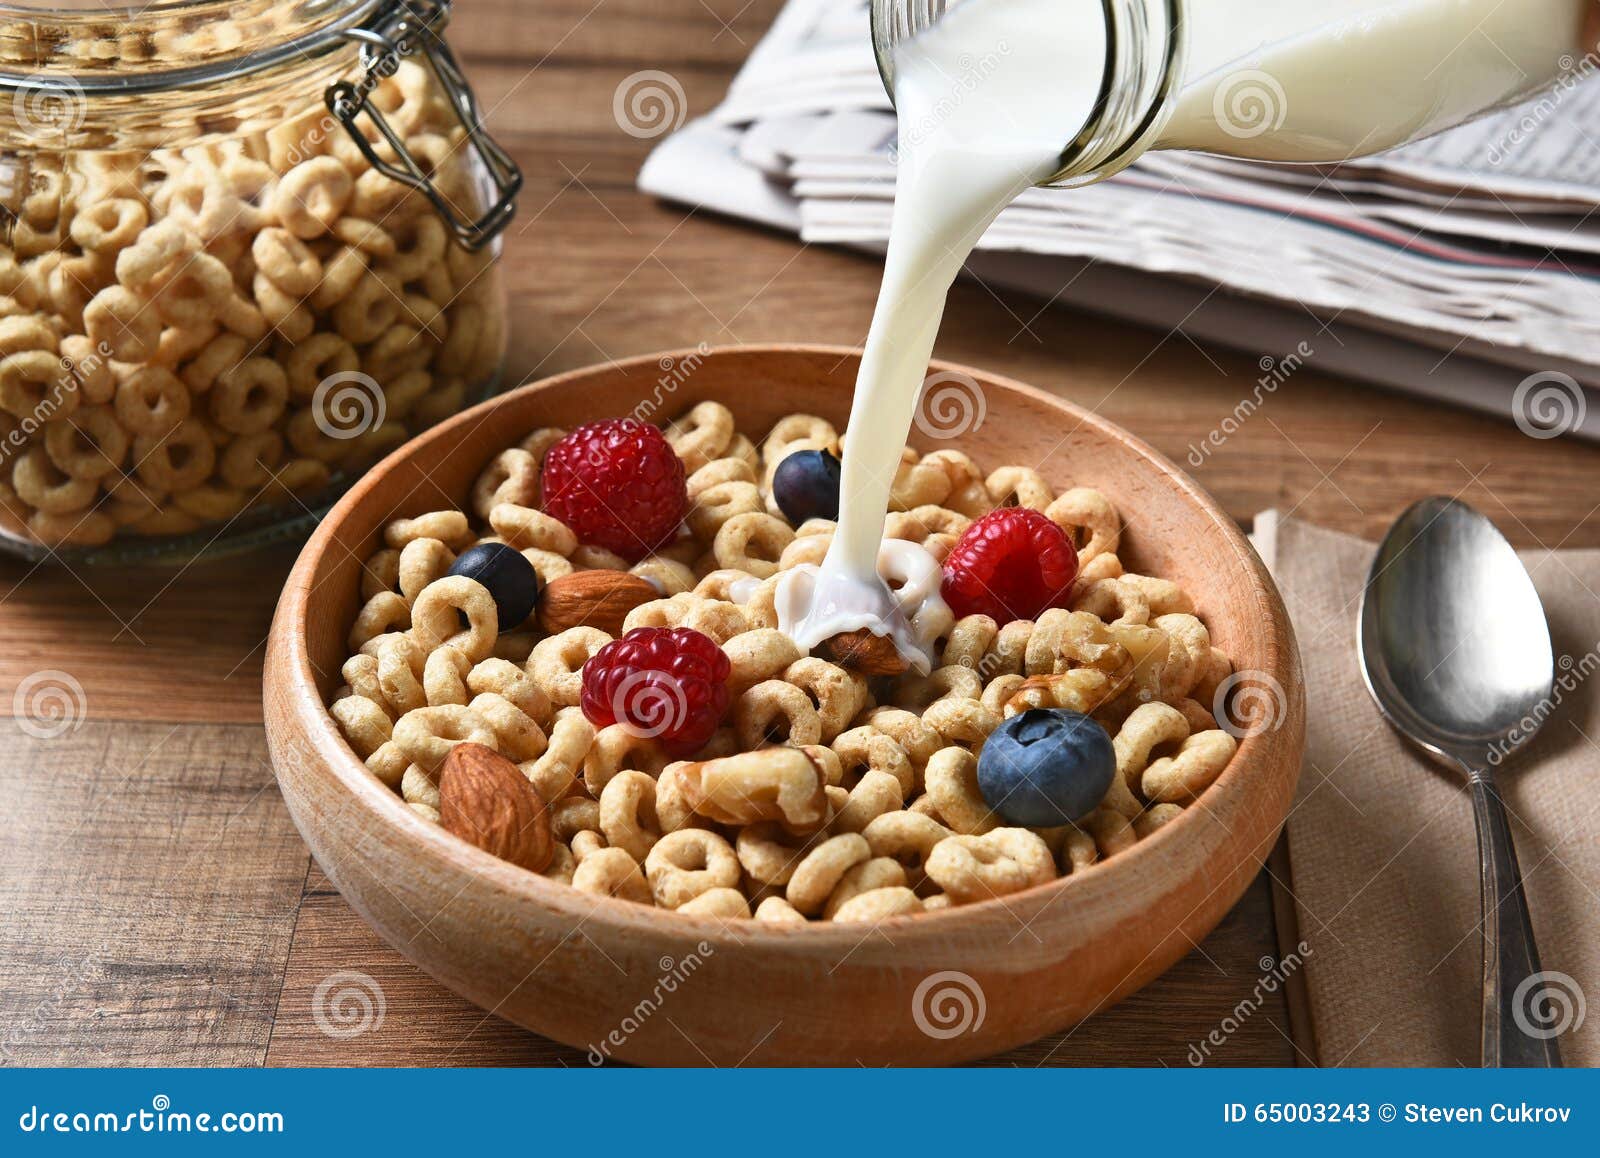 https://thumbs.dreamstime.com/z/breakfast-cereal-milk-pour-high-angle-view-bowl-blueberries-raspberries-nuts-bottle-pouring-bowl-65003243.jpg